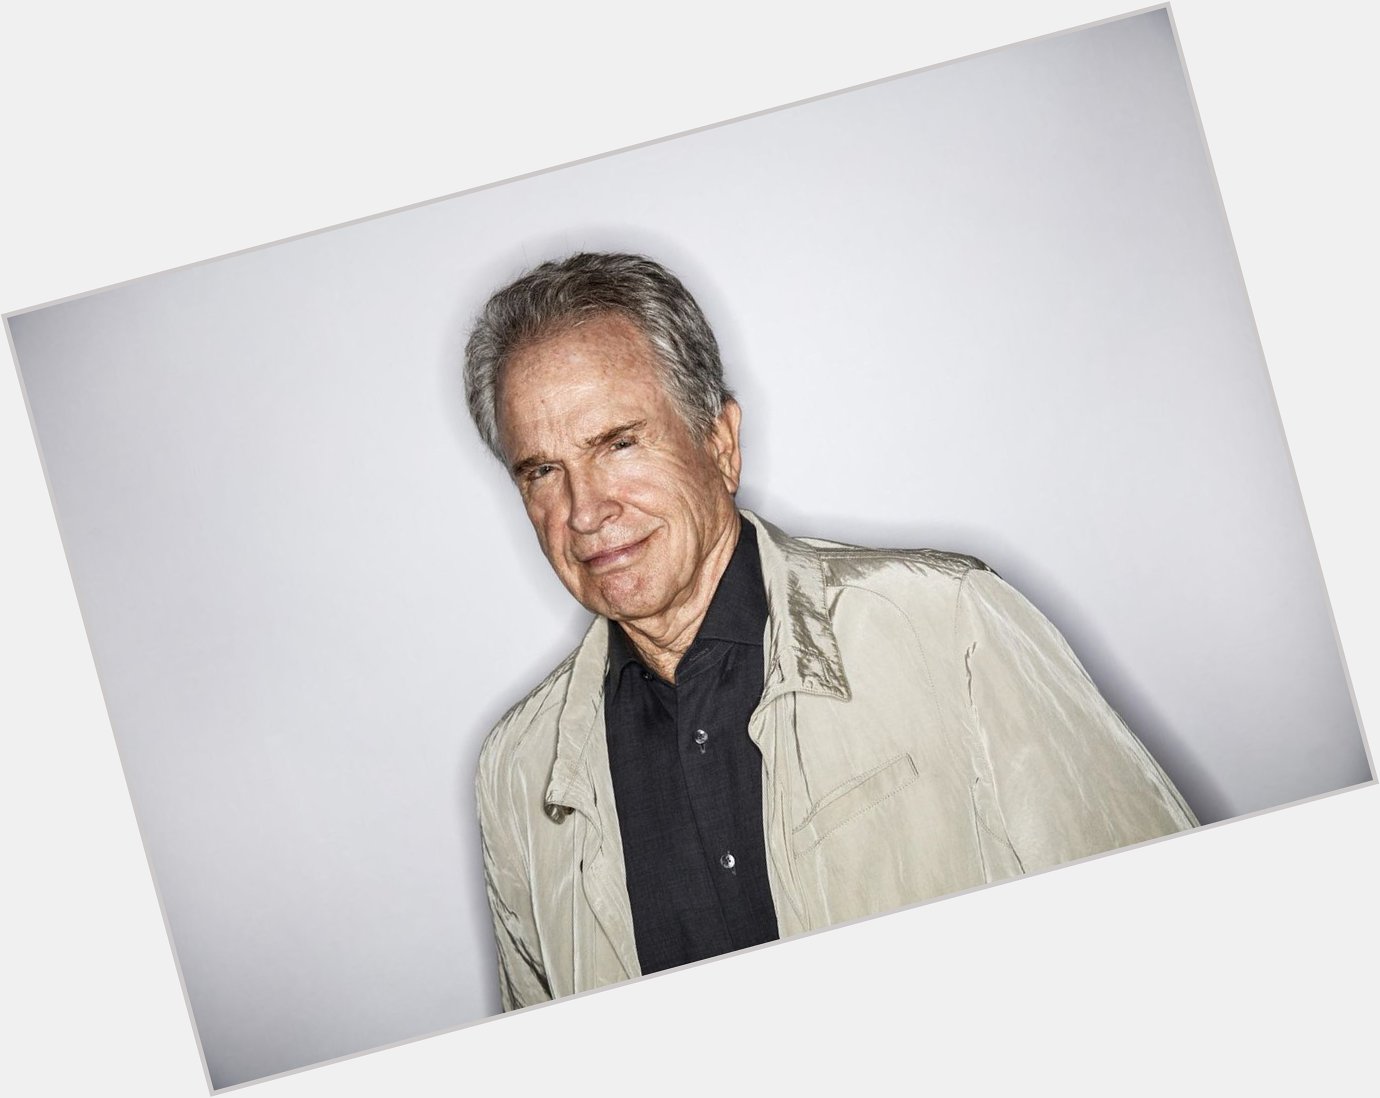 Happy birthday to actor Warren Beatty, who is 81 today  